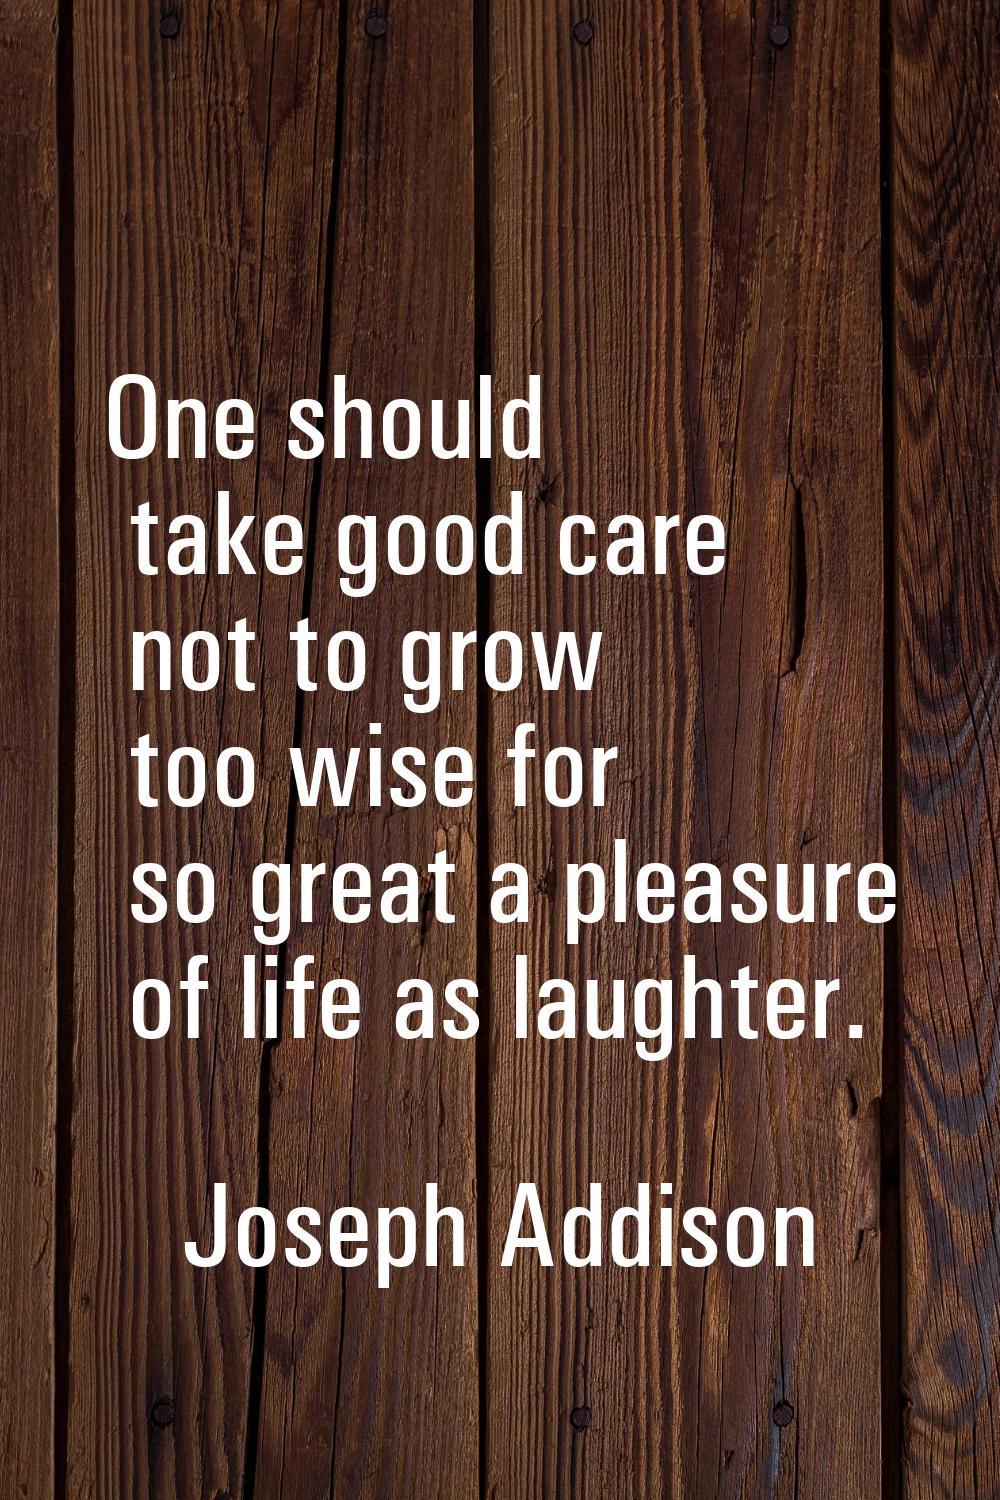 One should take good care not to grow too wise for so great a pleasure of life as laughter.